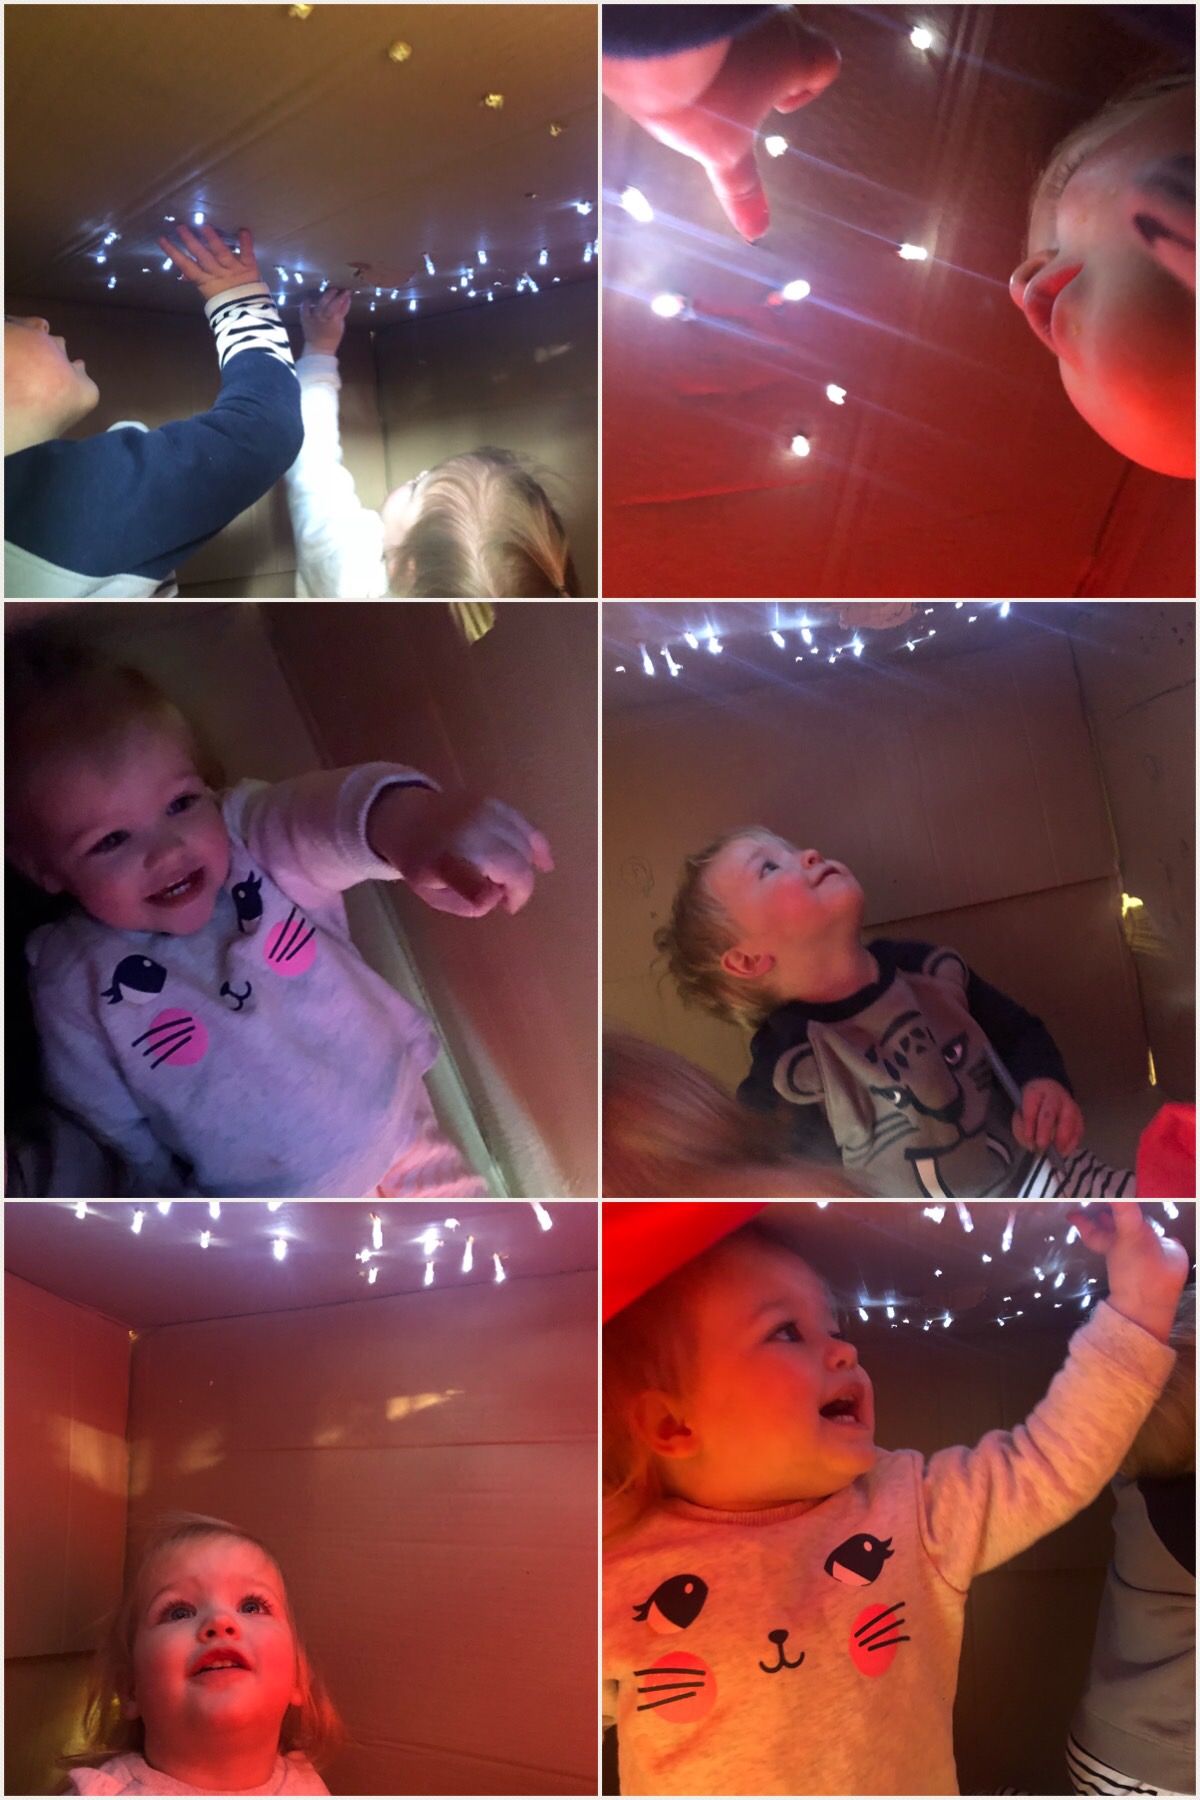 Create some magic for your children with these amazing twinkly fairy light stars